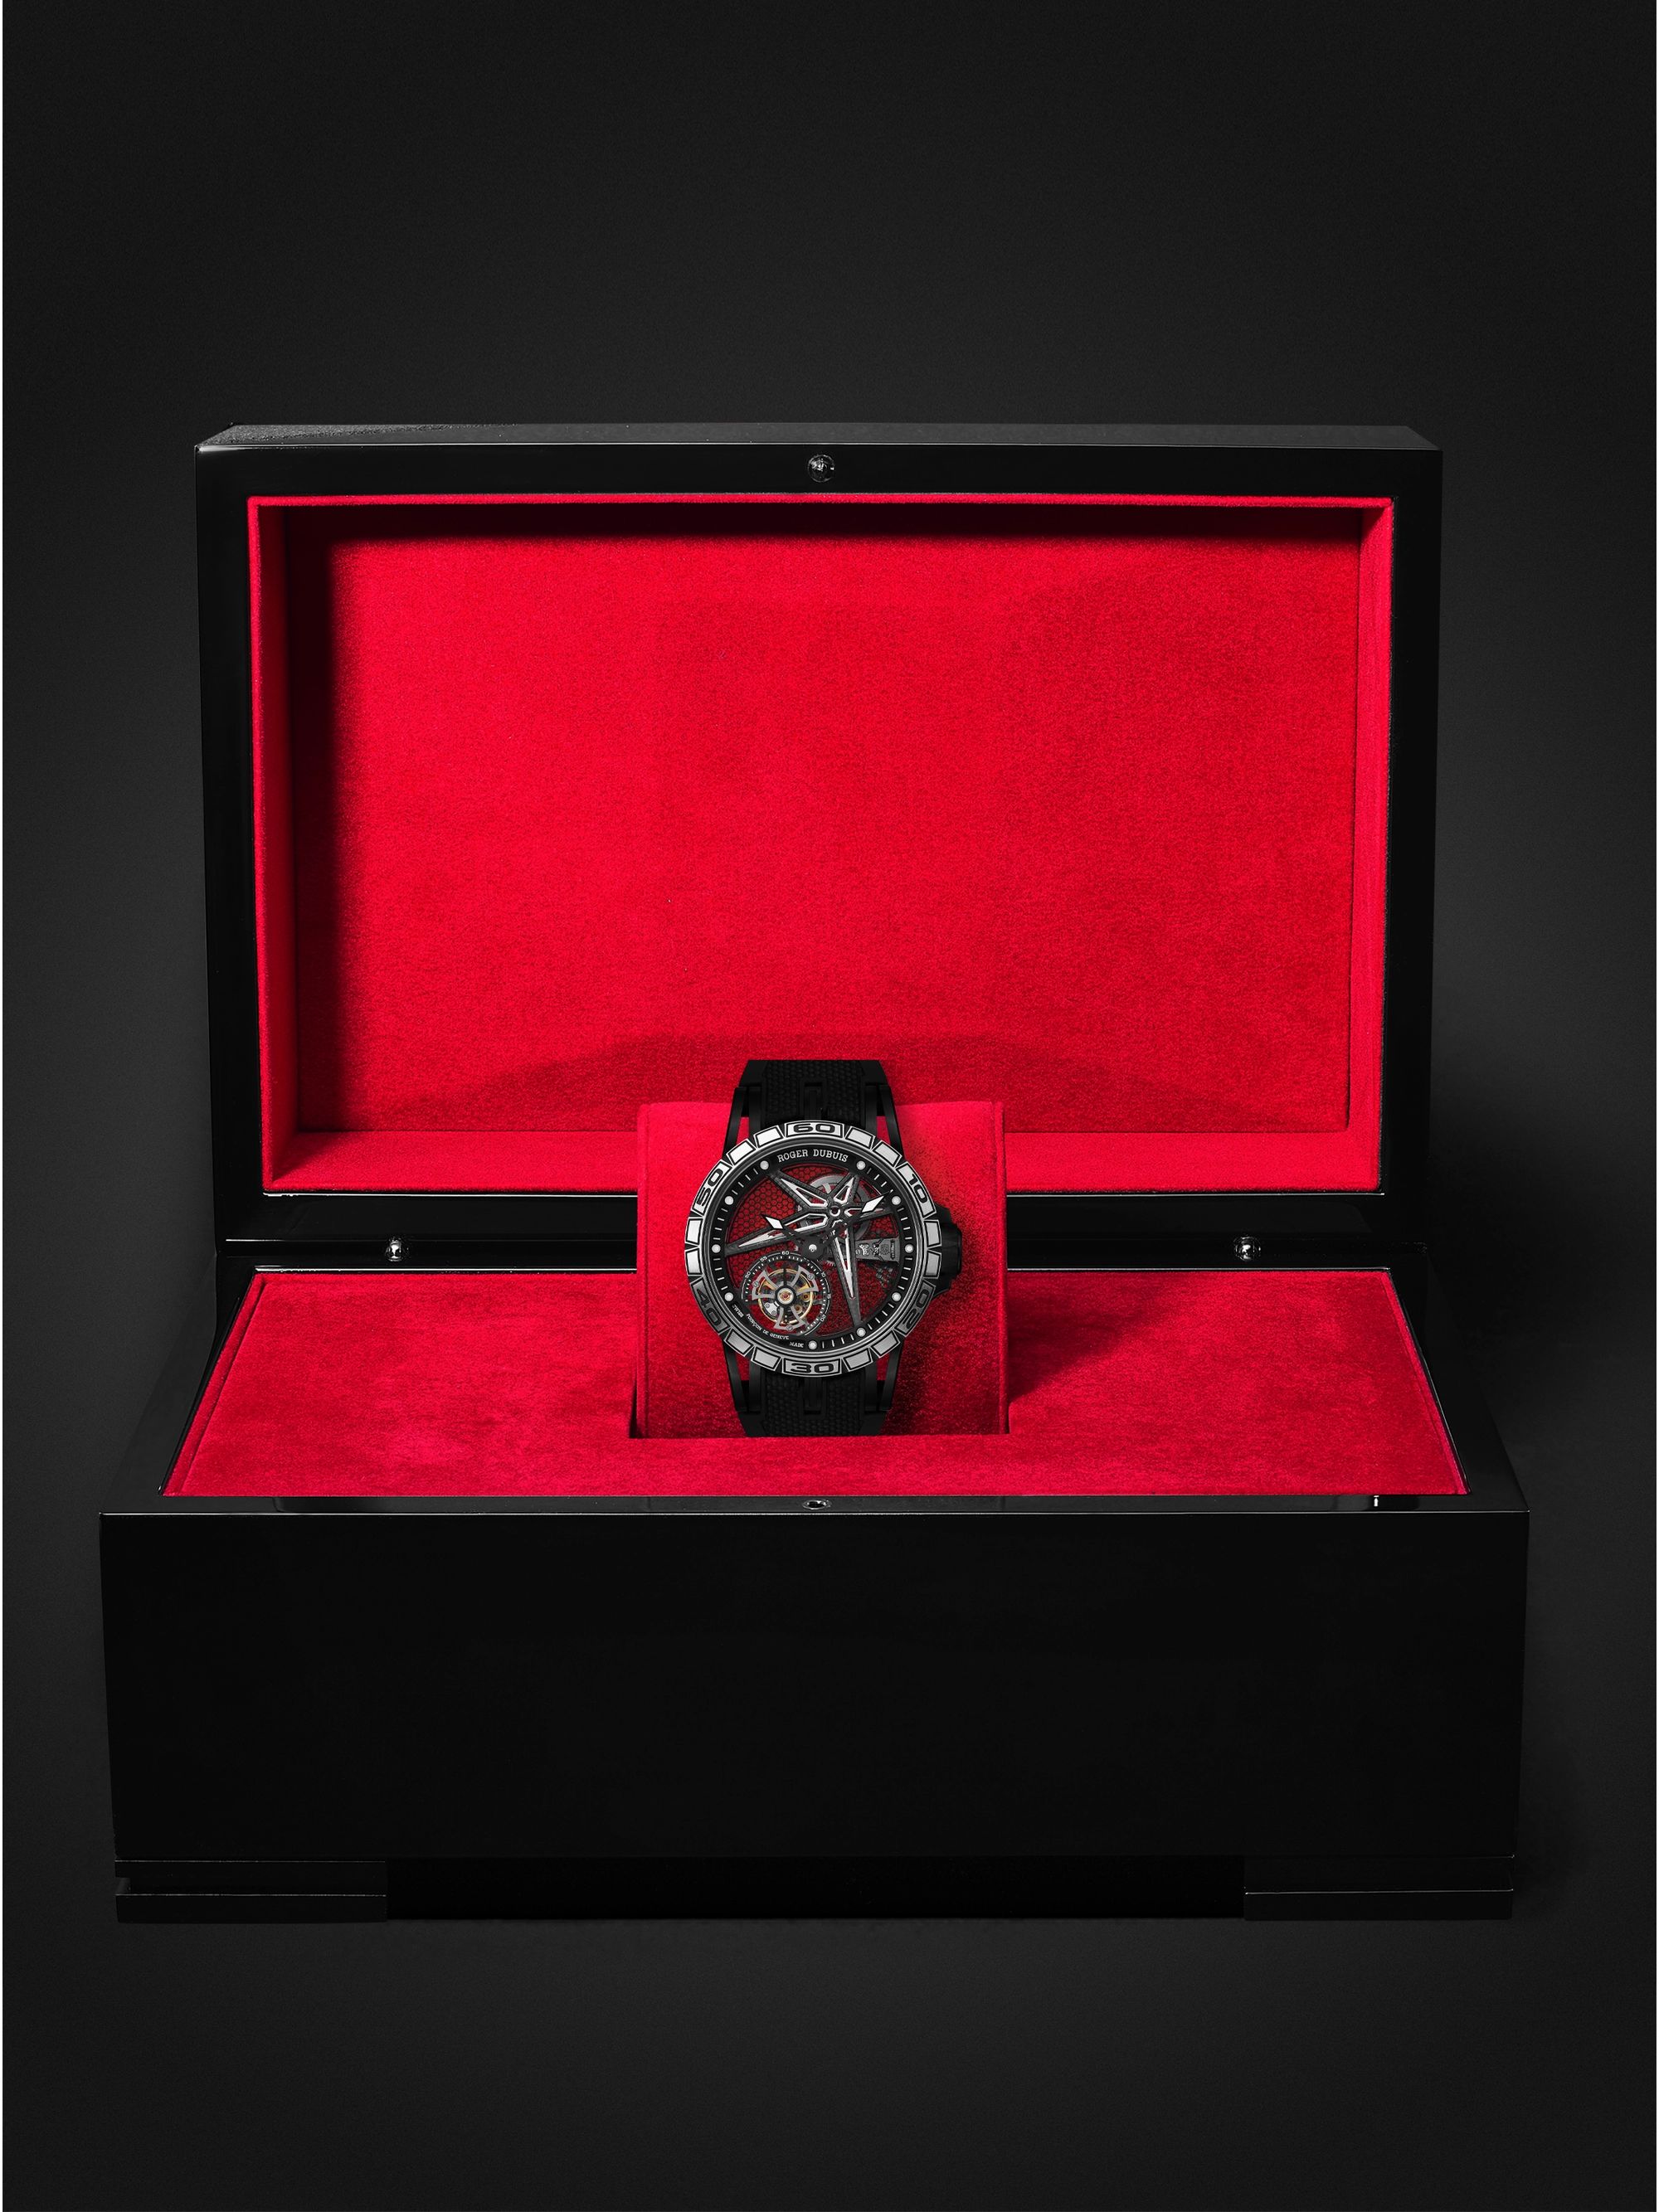 ROGER DUBUIS Excalibur Spider Black DLC Limited Edition Hand-Wound Flying Tourbillon 39mm Titanium and Rubber Watch, Ref. No. RDDBEX0815